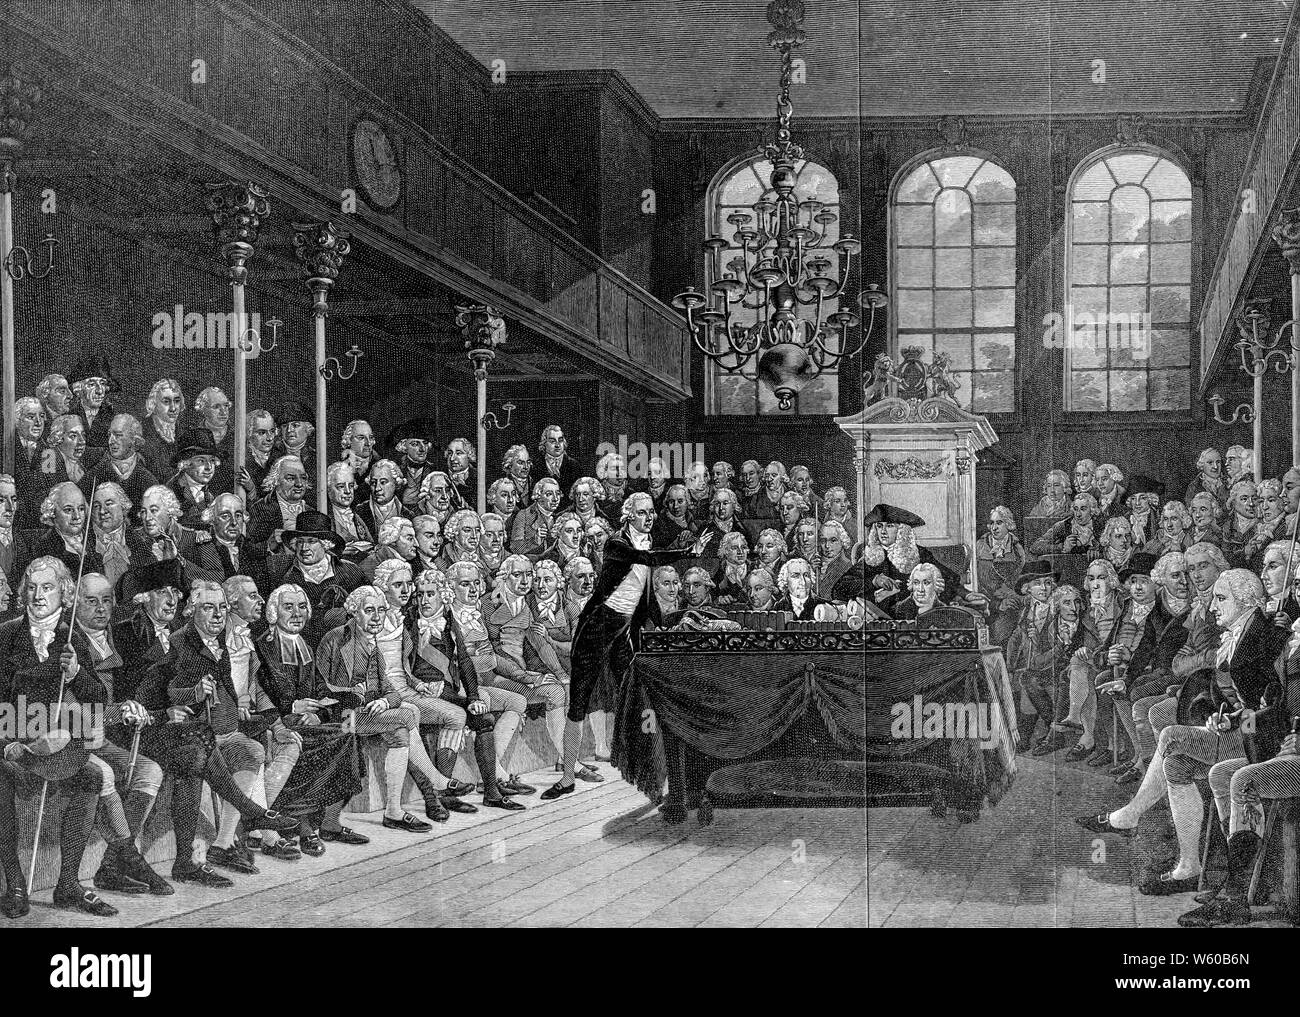 The House of Commons, c1794. After Karl Anton Hickel (1745-1798). Here we see Prime Minister William Pitt the Younger (1759-1806) addressing the House of Commons in St Stephen's Chapel, since destroyed by fire. Stock Photo